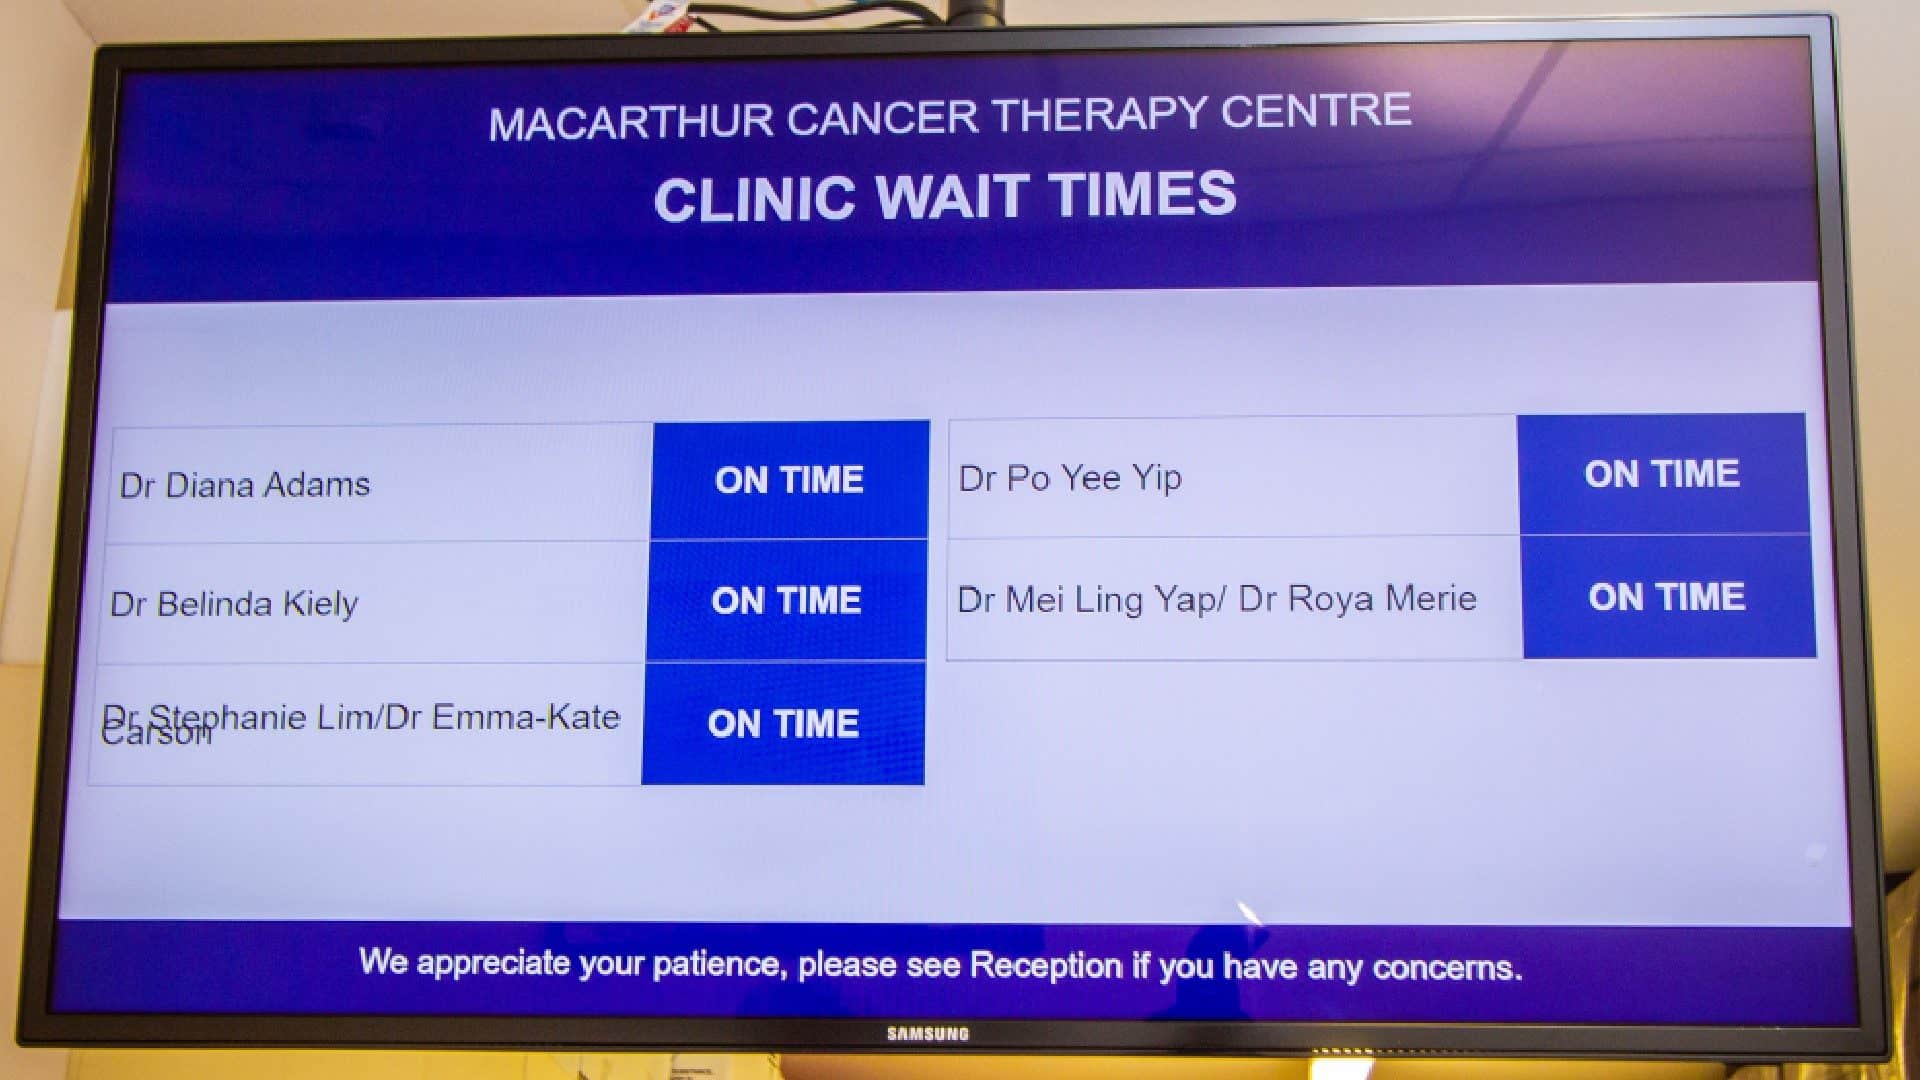 Digital Signage – Cancer Therapy Centre Clinic Wait Times